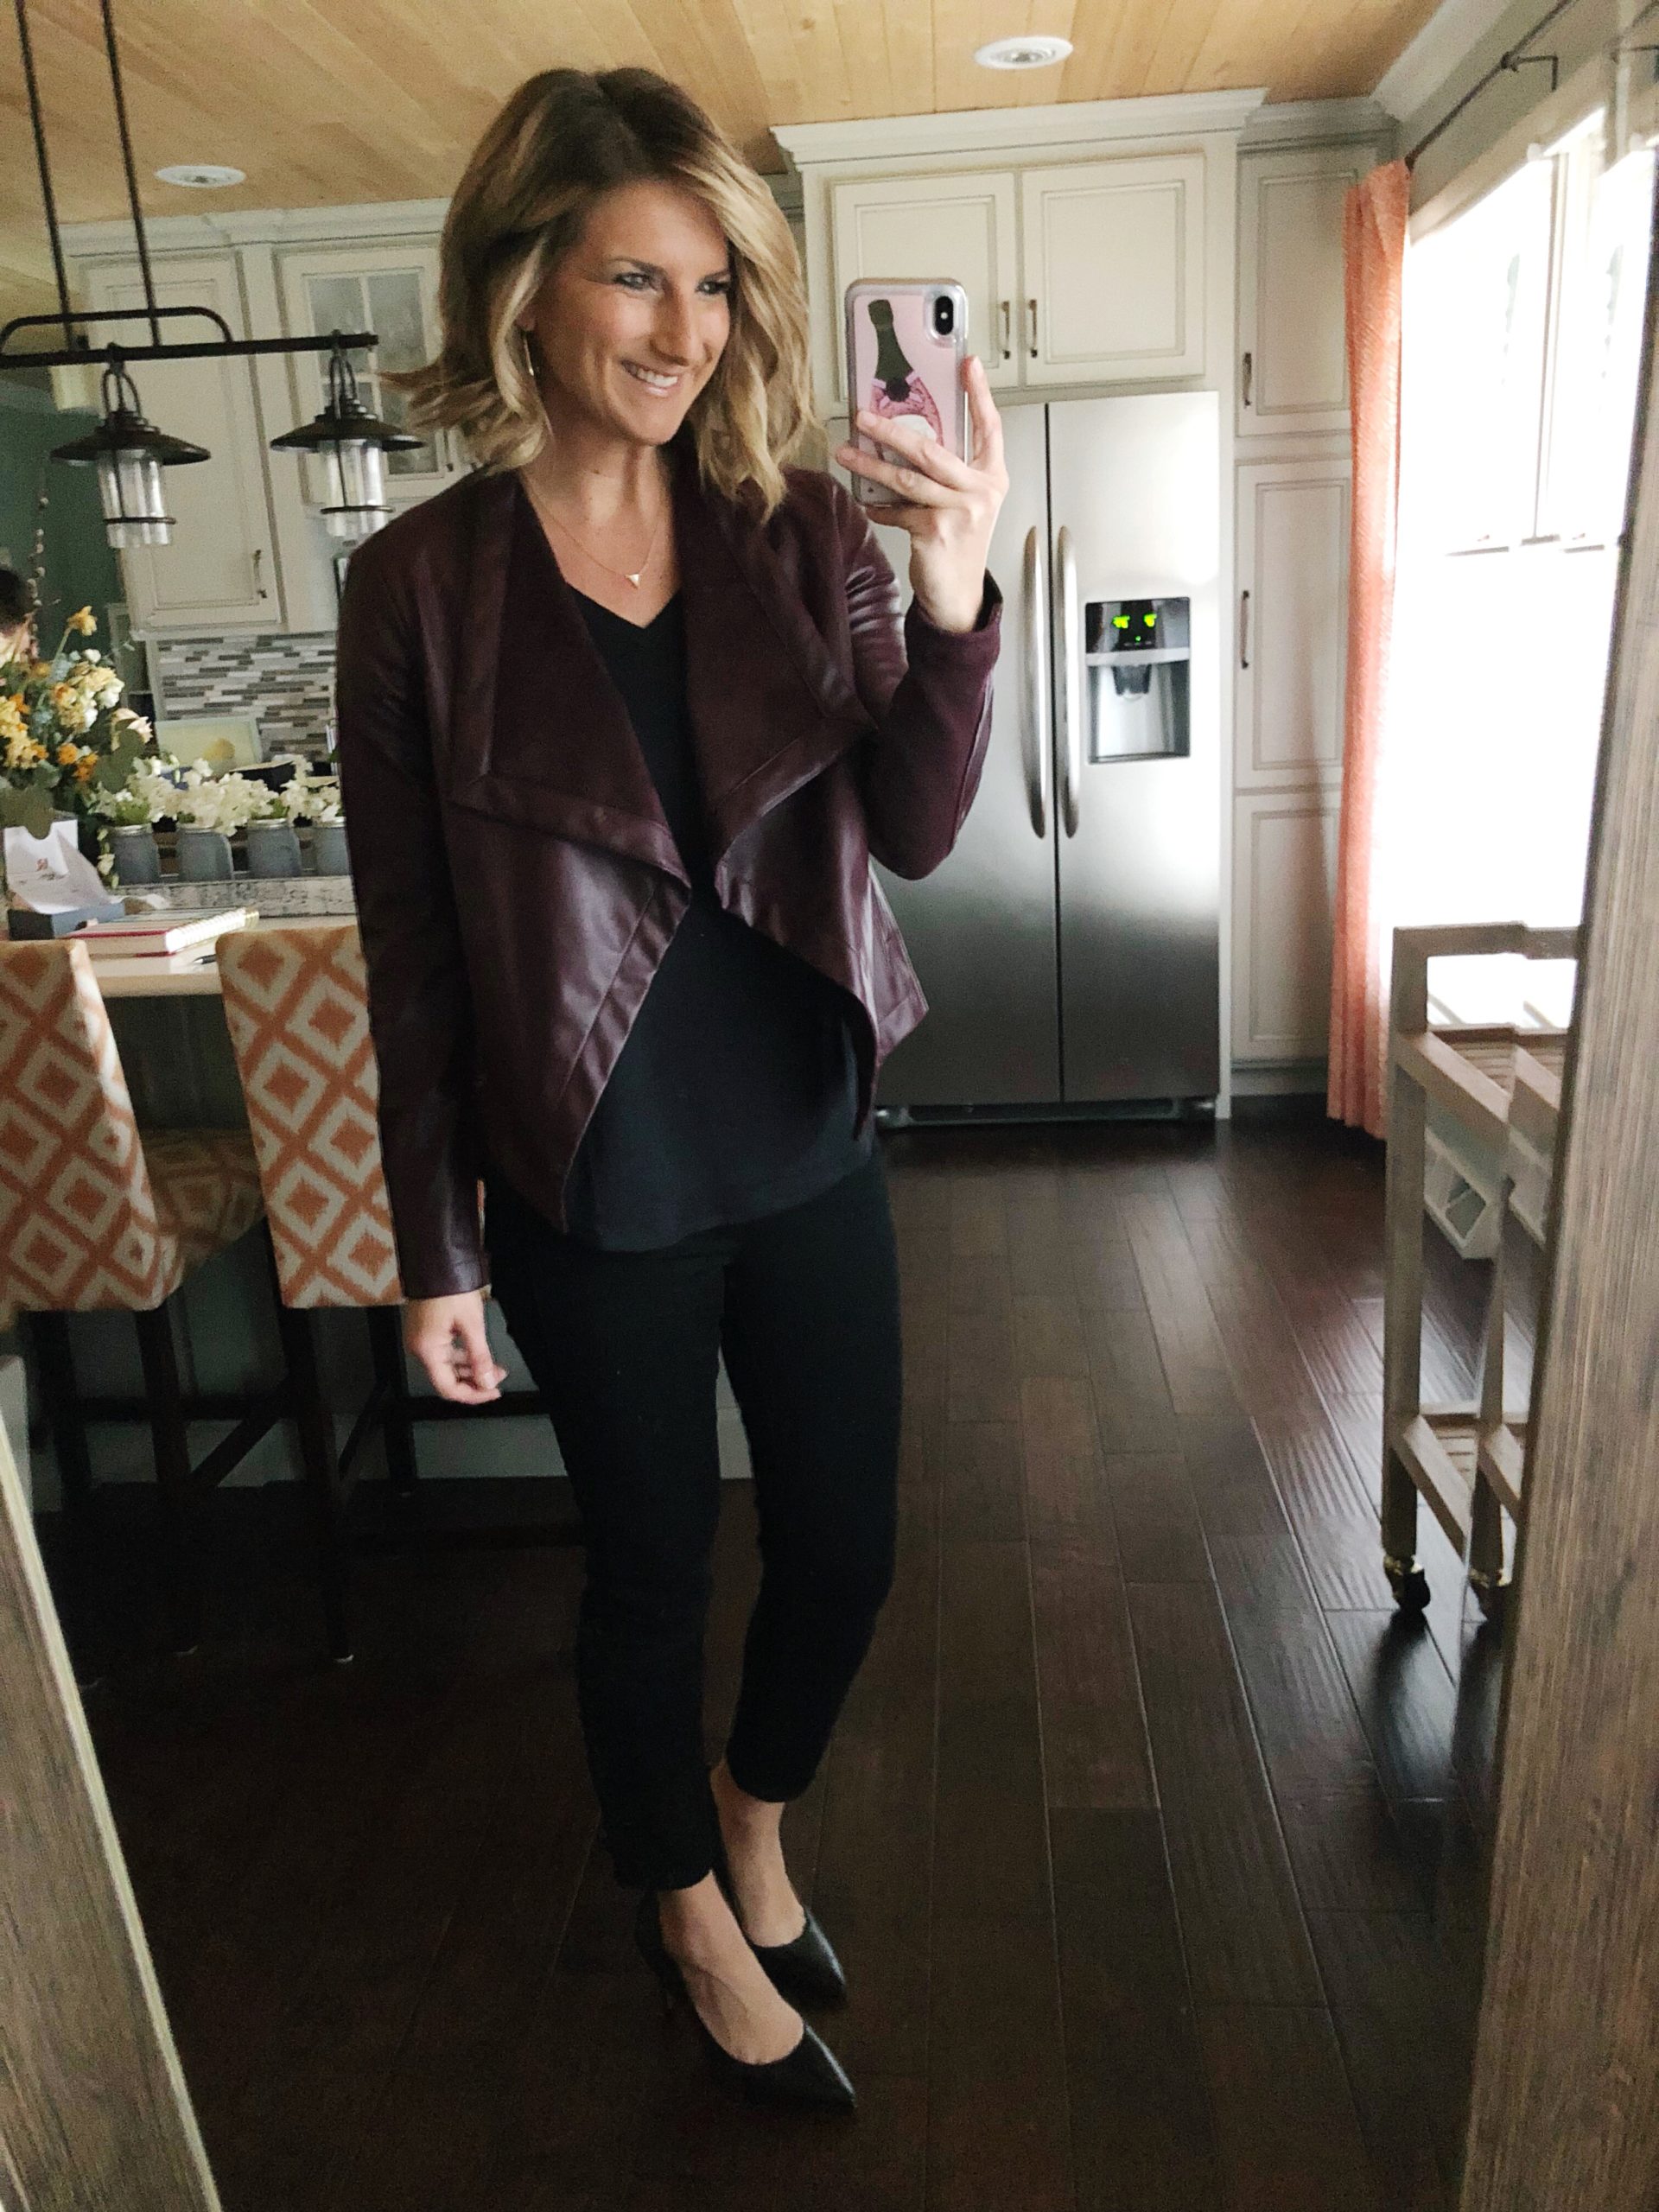 Dressy Date Night Outfit // Black Top + Lace Up Cropped Black Skinny Jeans + Pointy Toed Heels + Drapey Jacket // Spring Fashion